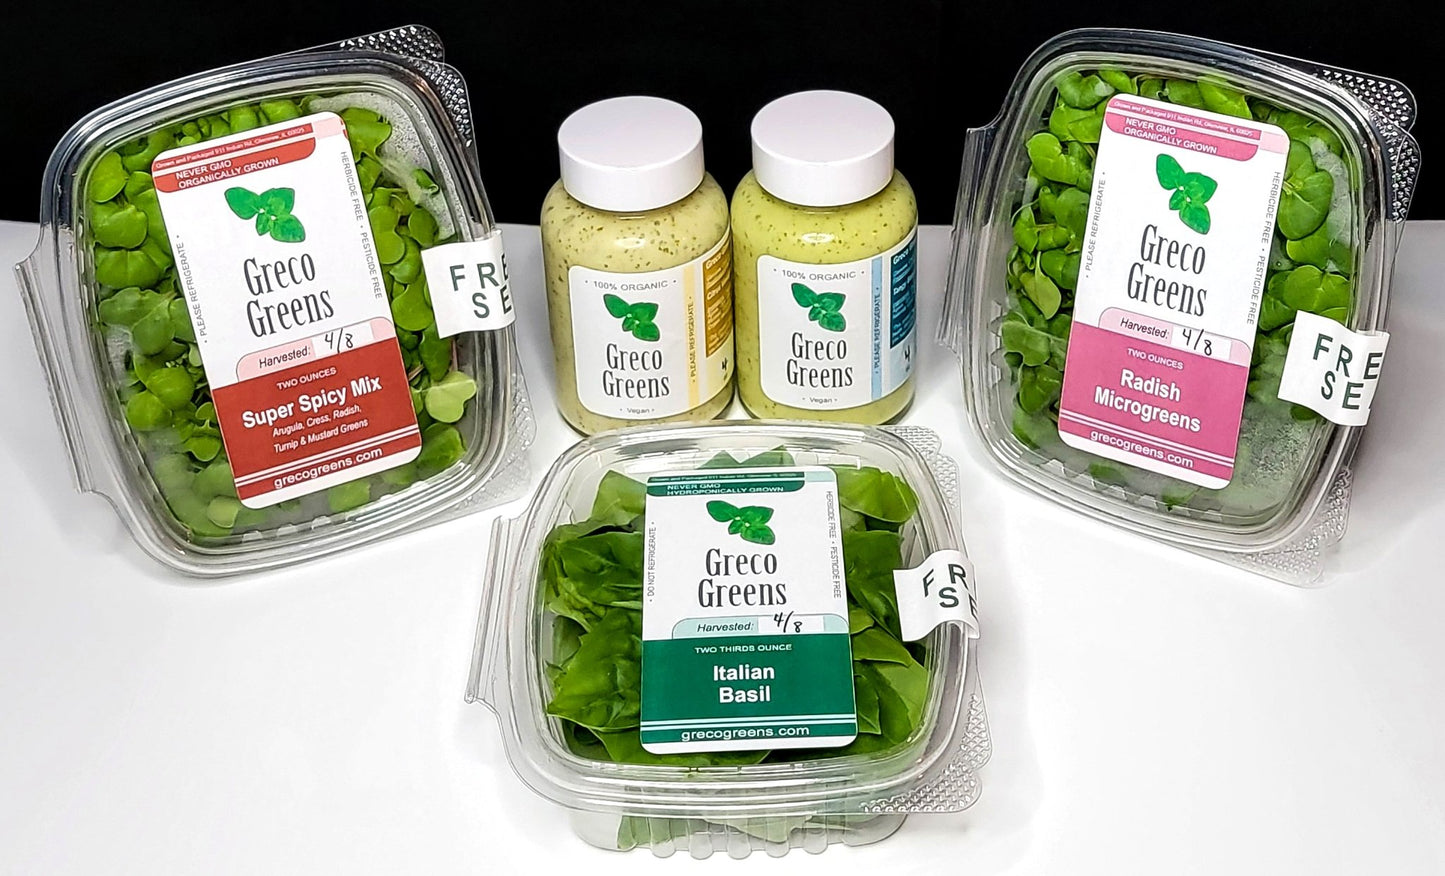 Culinary Sampler Crate - Greco Greens